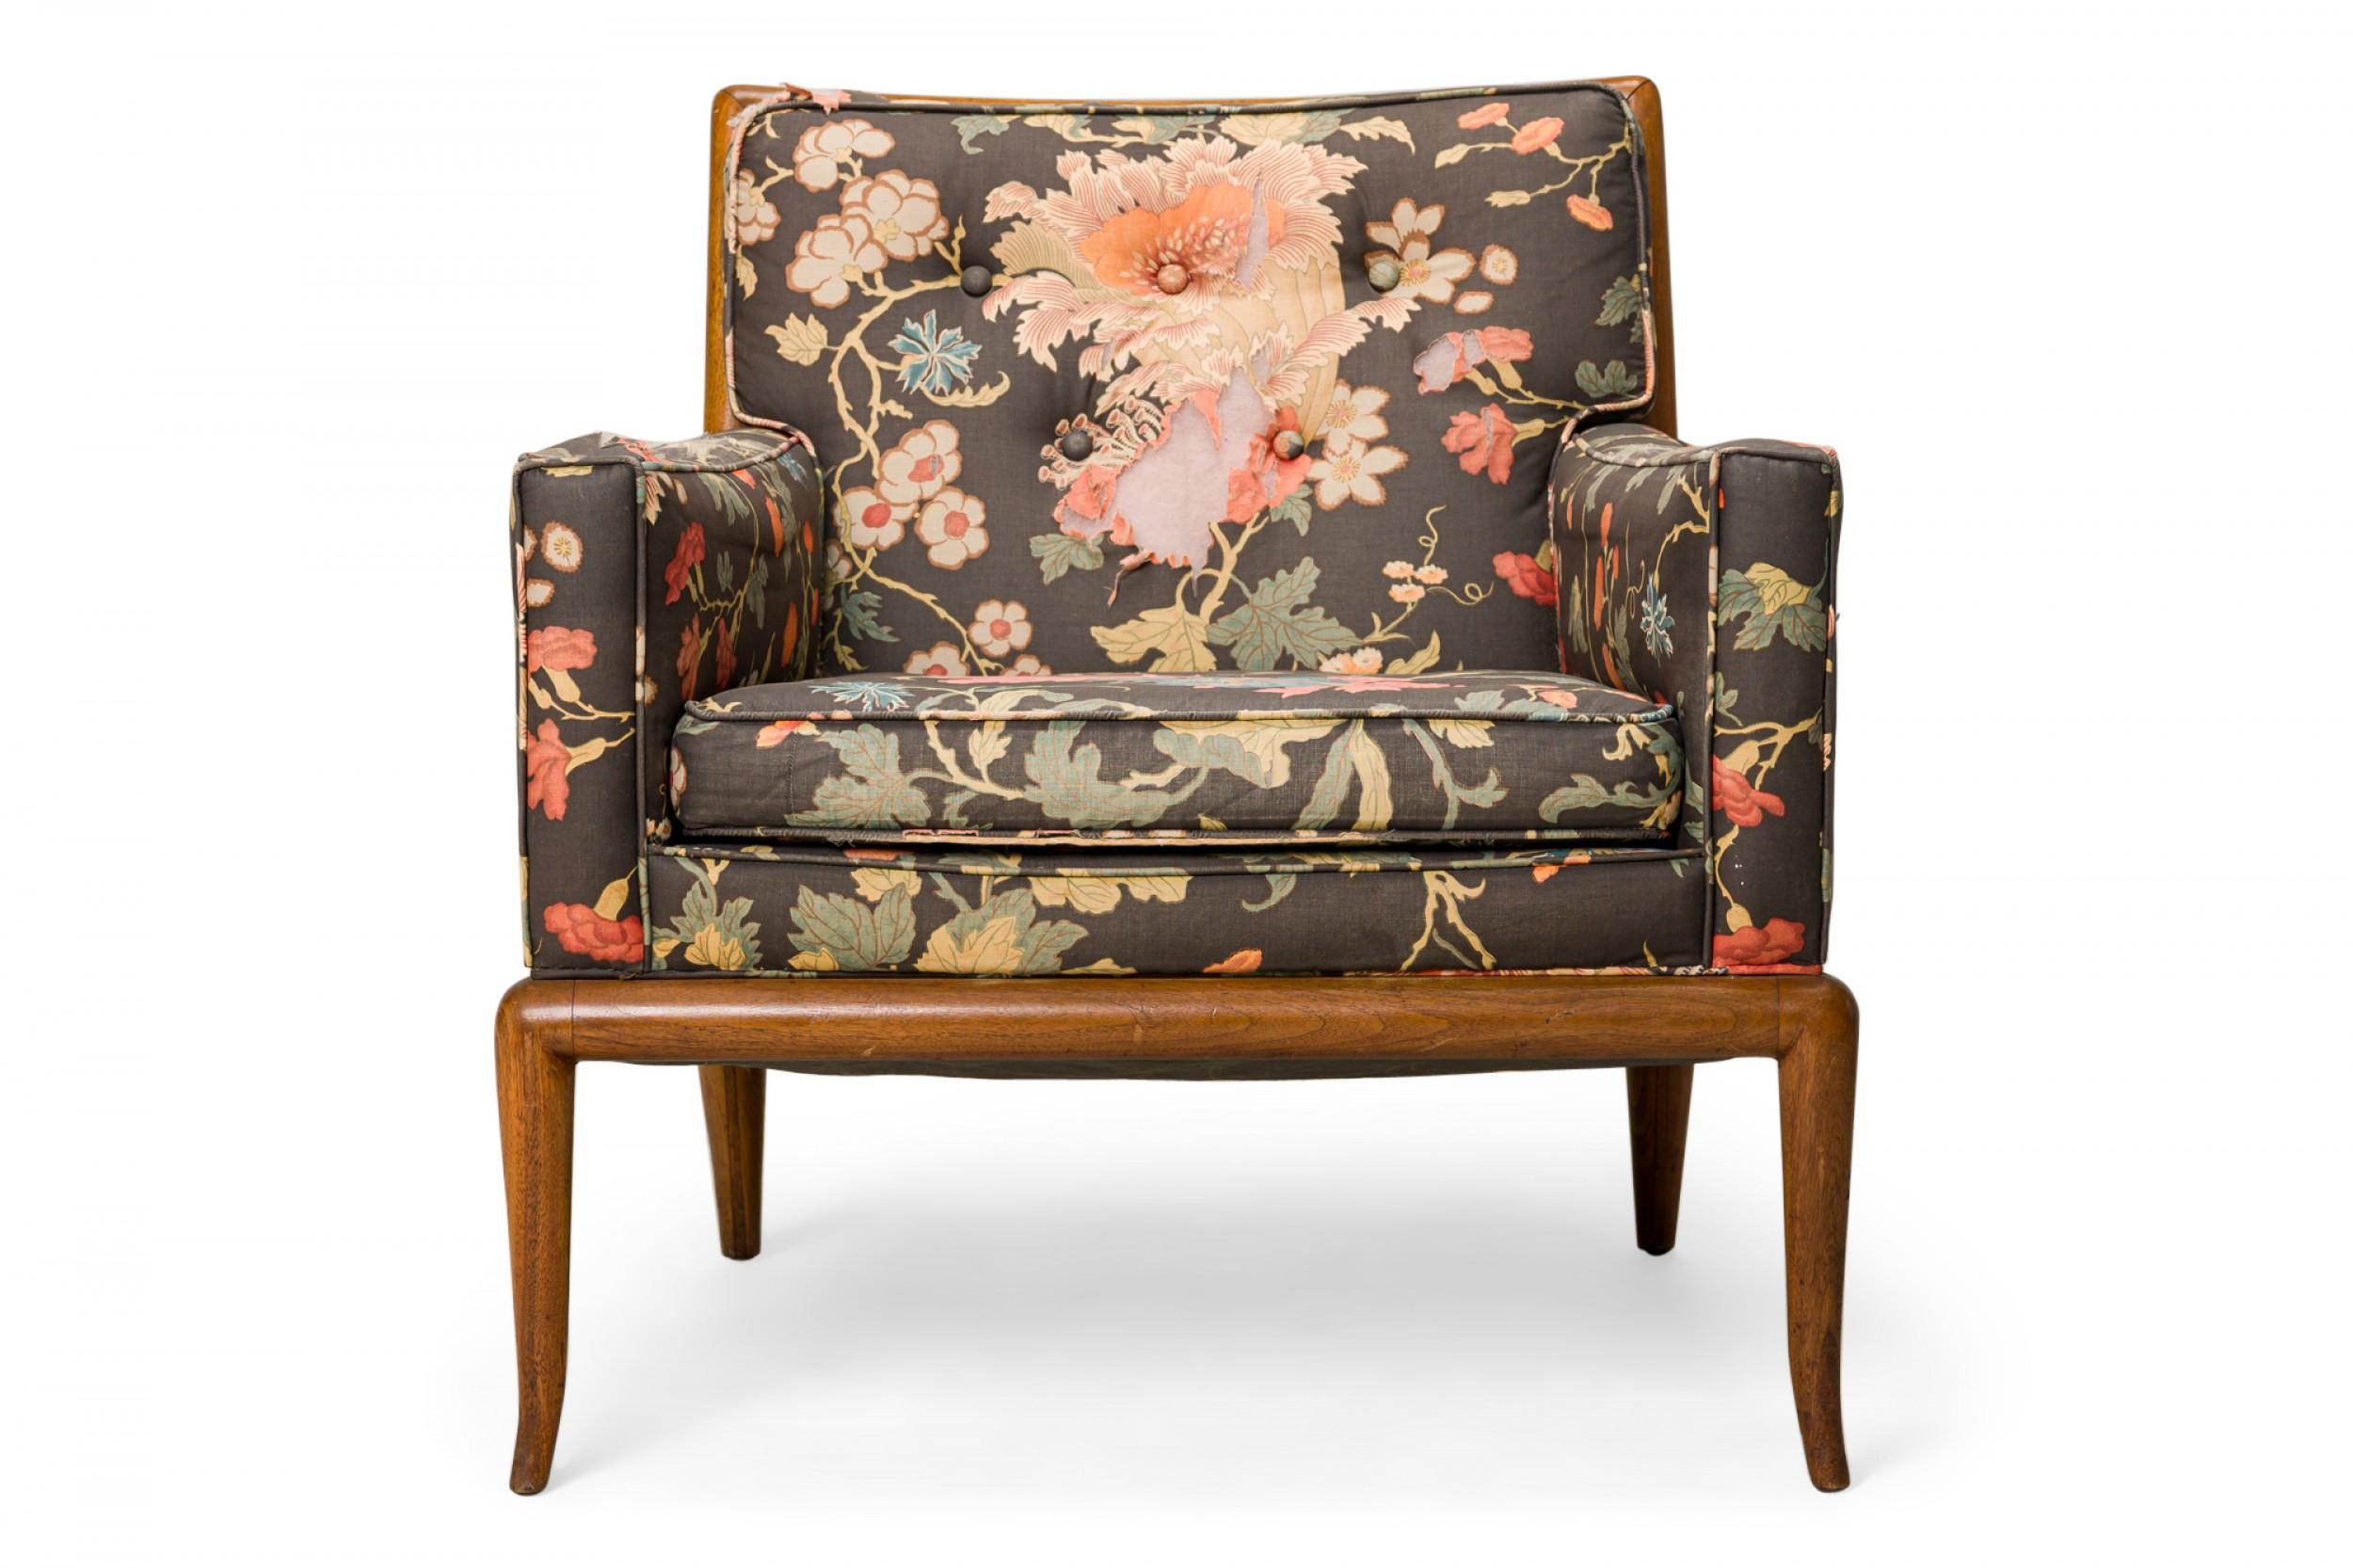 American mid-century lounge / armchair with a square walnut frame, upholstered in a fabric with a bright floral pattern against a black background with a button-tufted back, resting on four slightly curved and tapered walnut legs.(T.H.